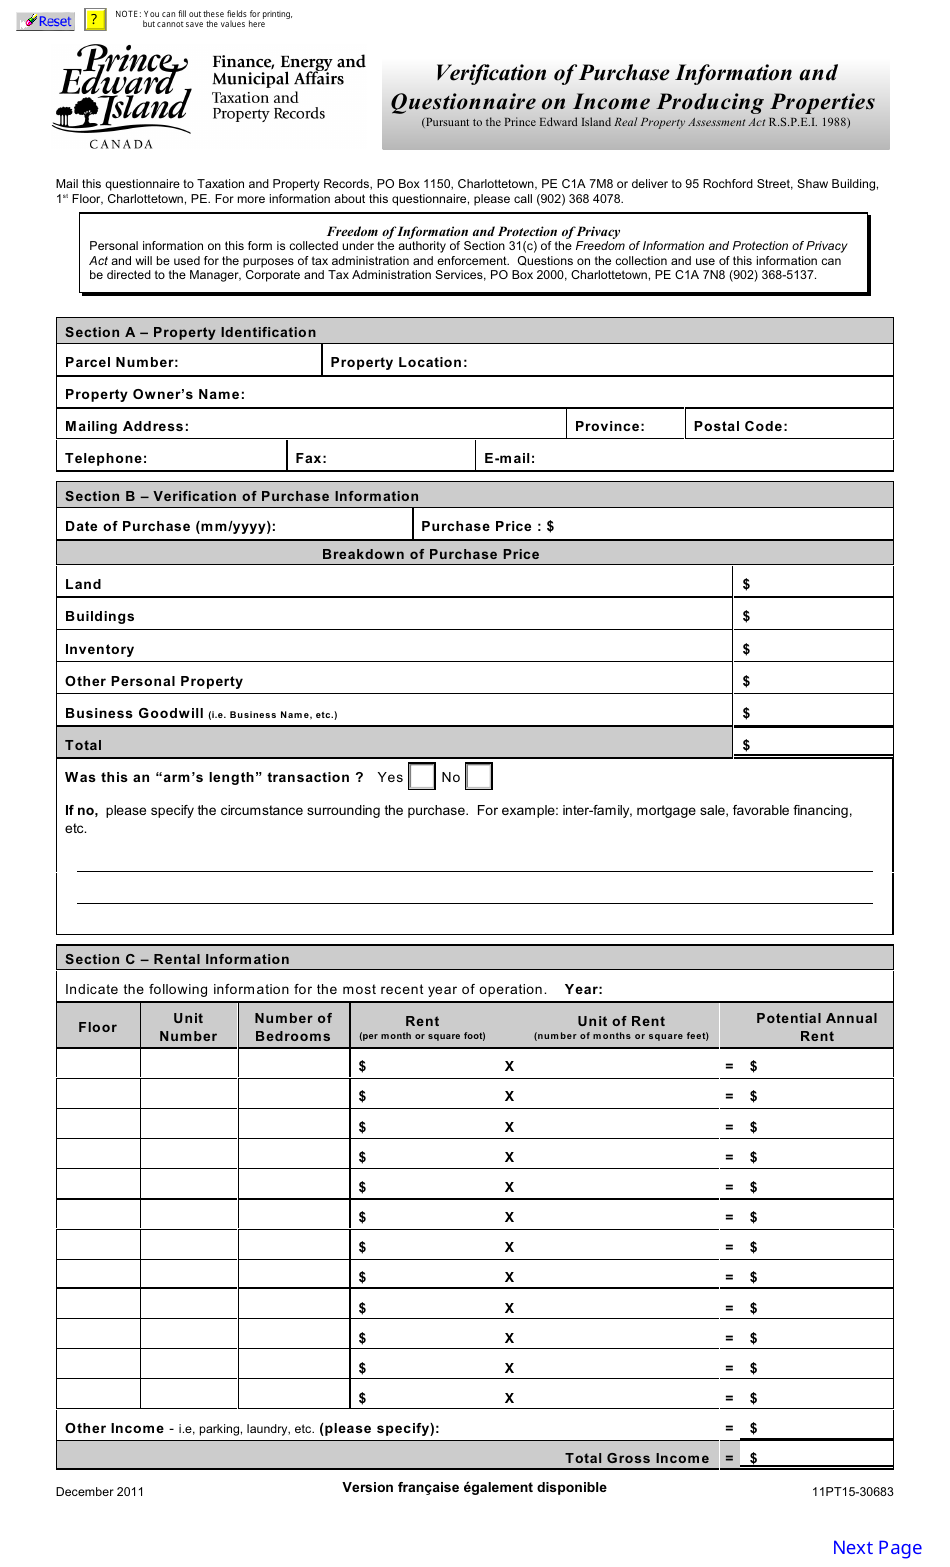 Form 11PT15-30683 Verification of Purchase Information and Questionnaire on Income Producing Properties - Prince Edward Island, Canada, Page 1